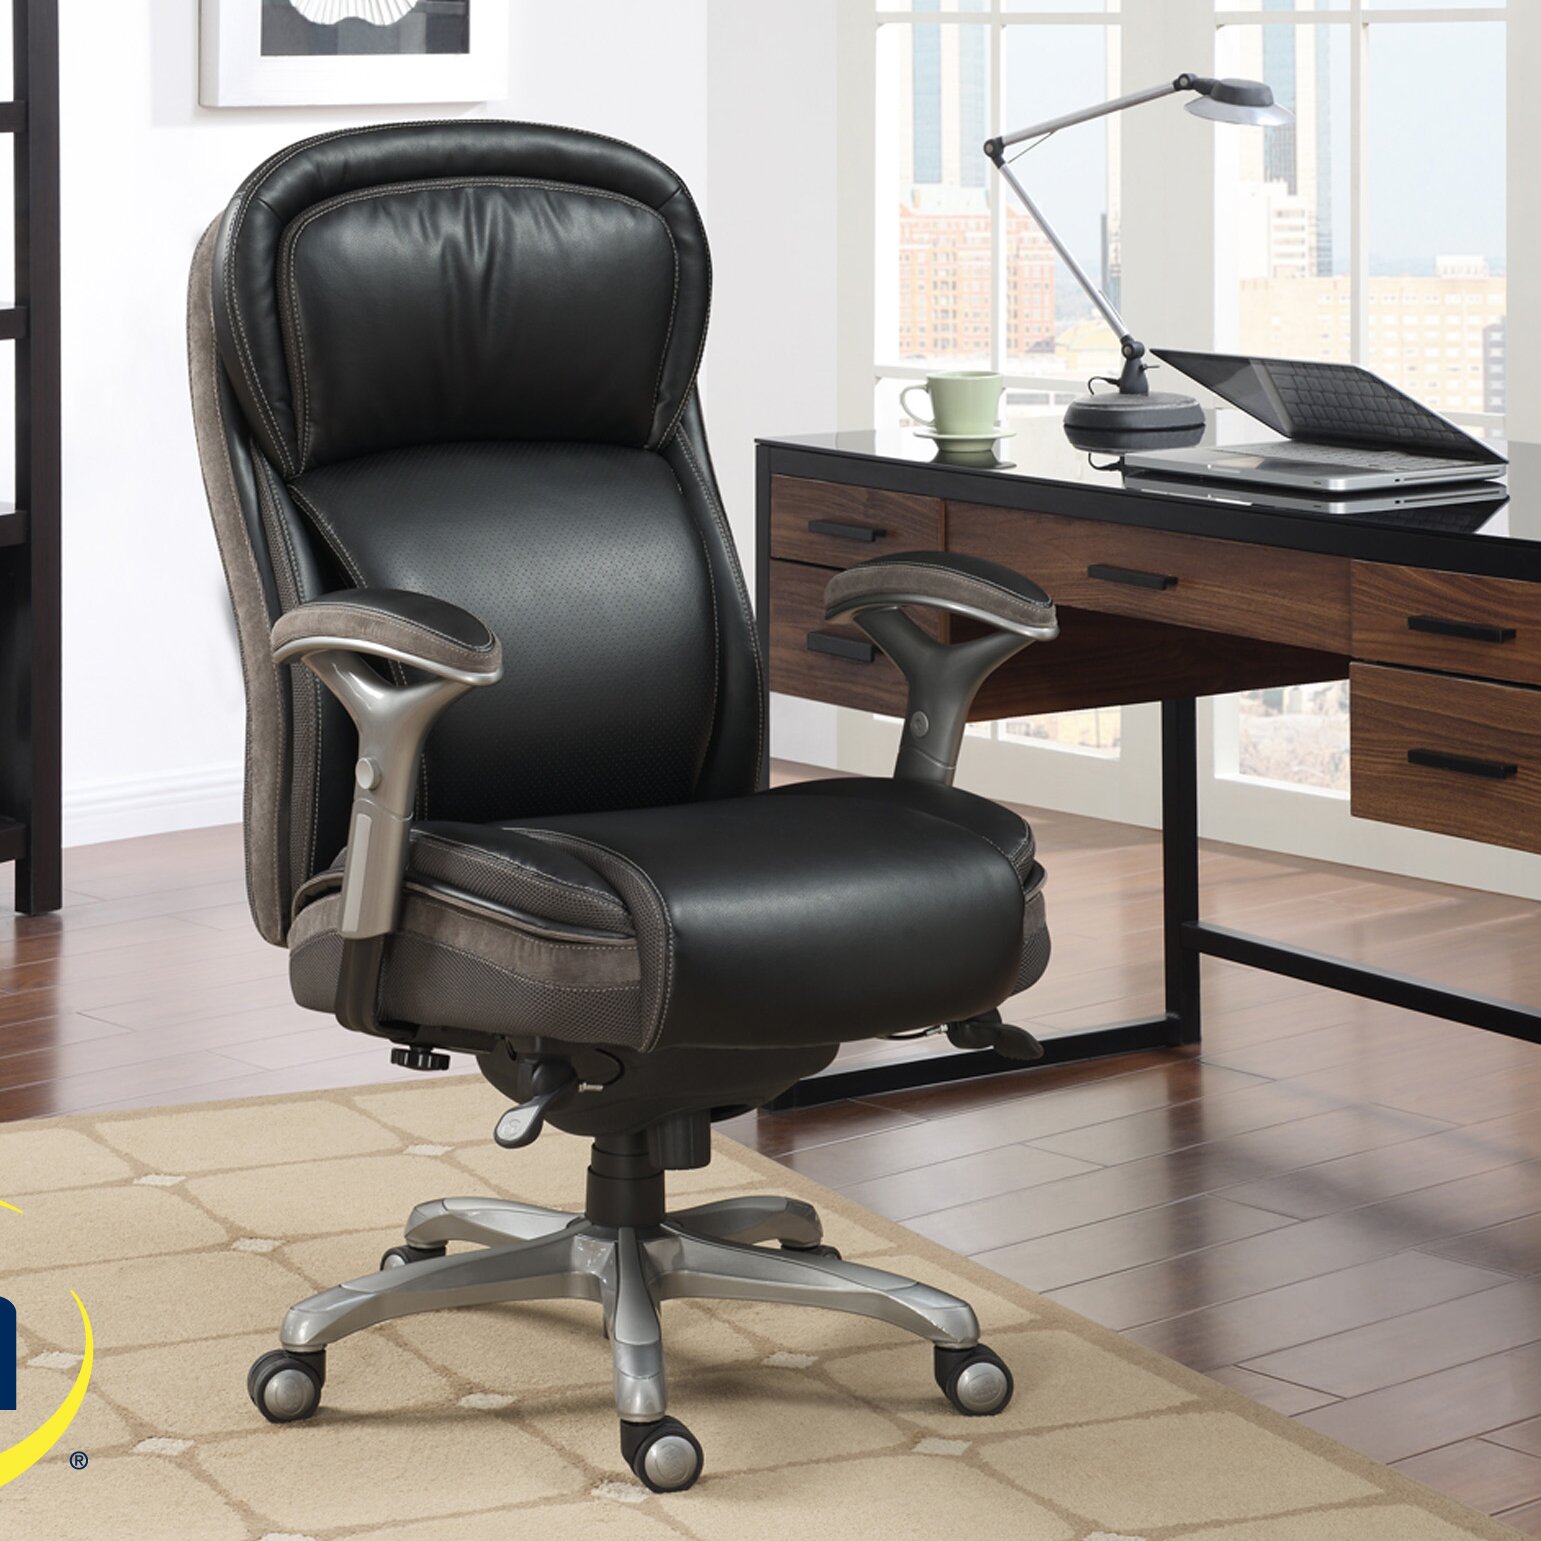 Serta at Home Blissfully High Back Manager Executive Chair